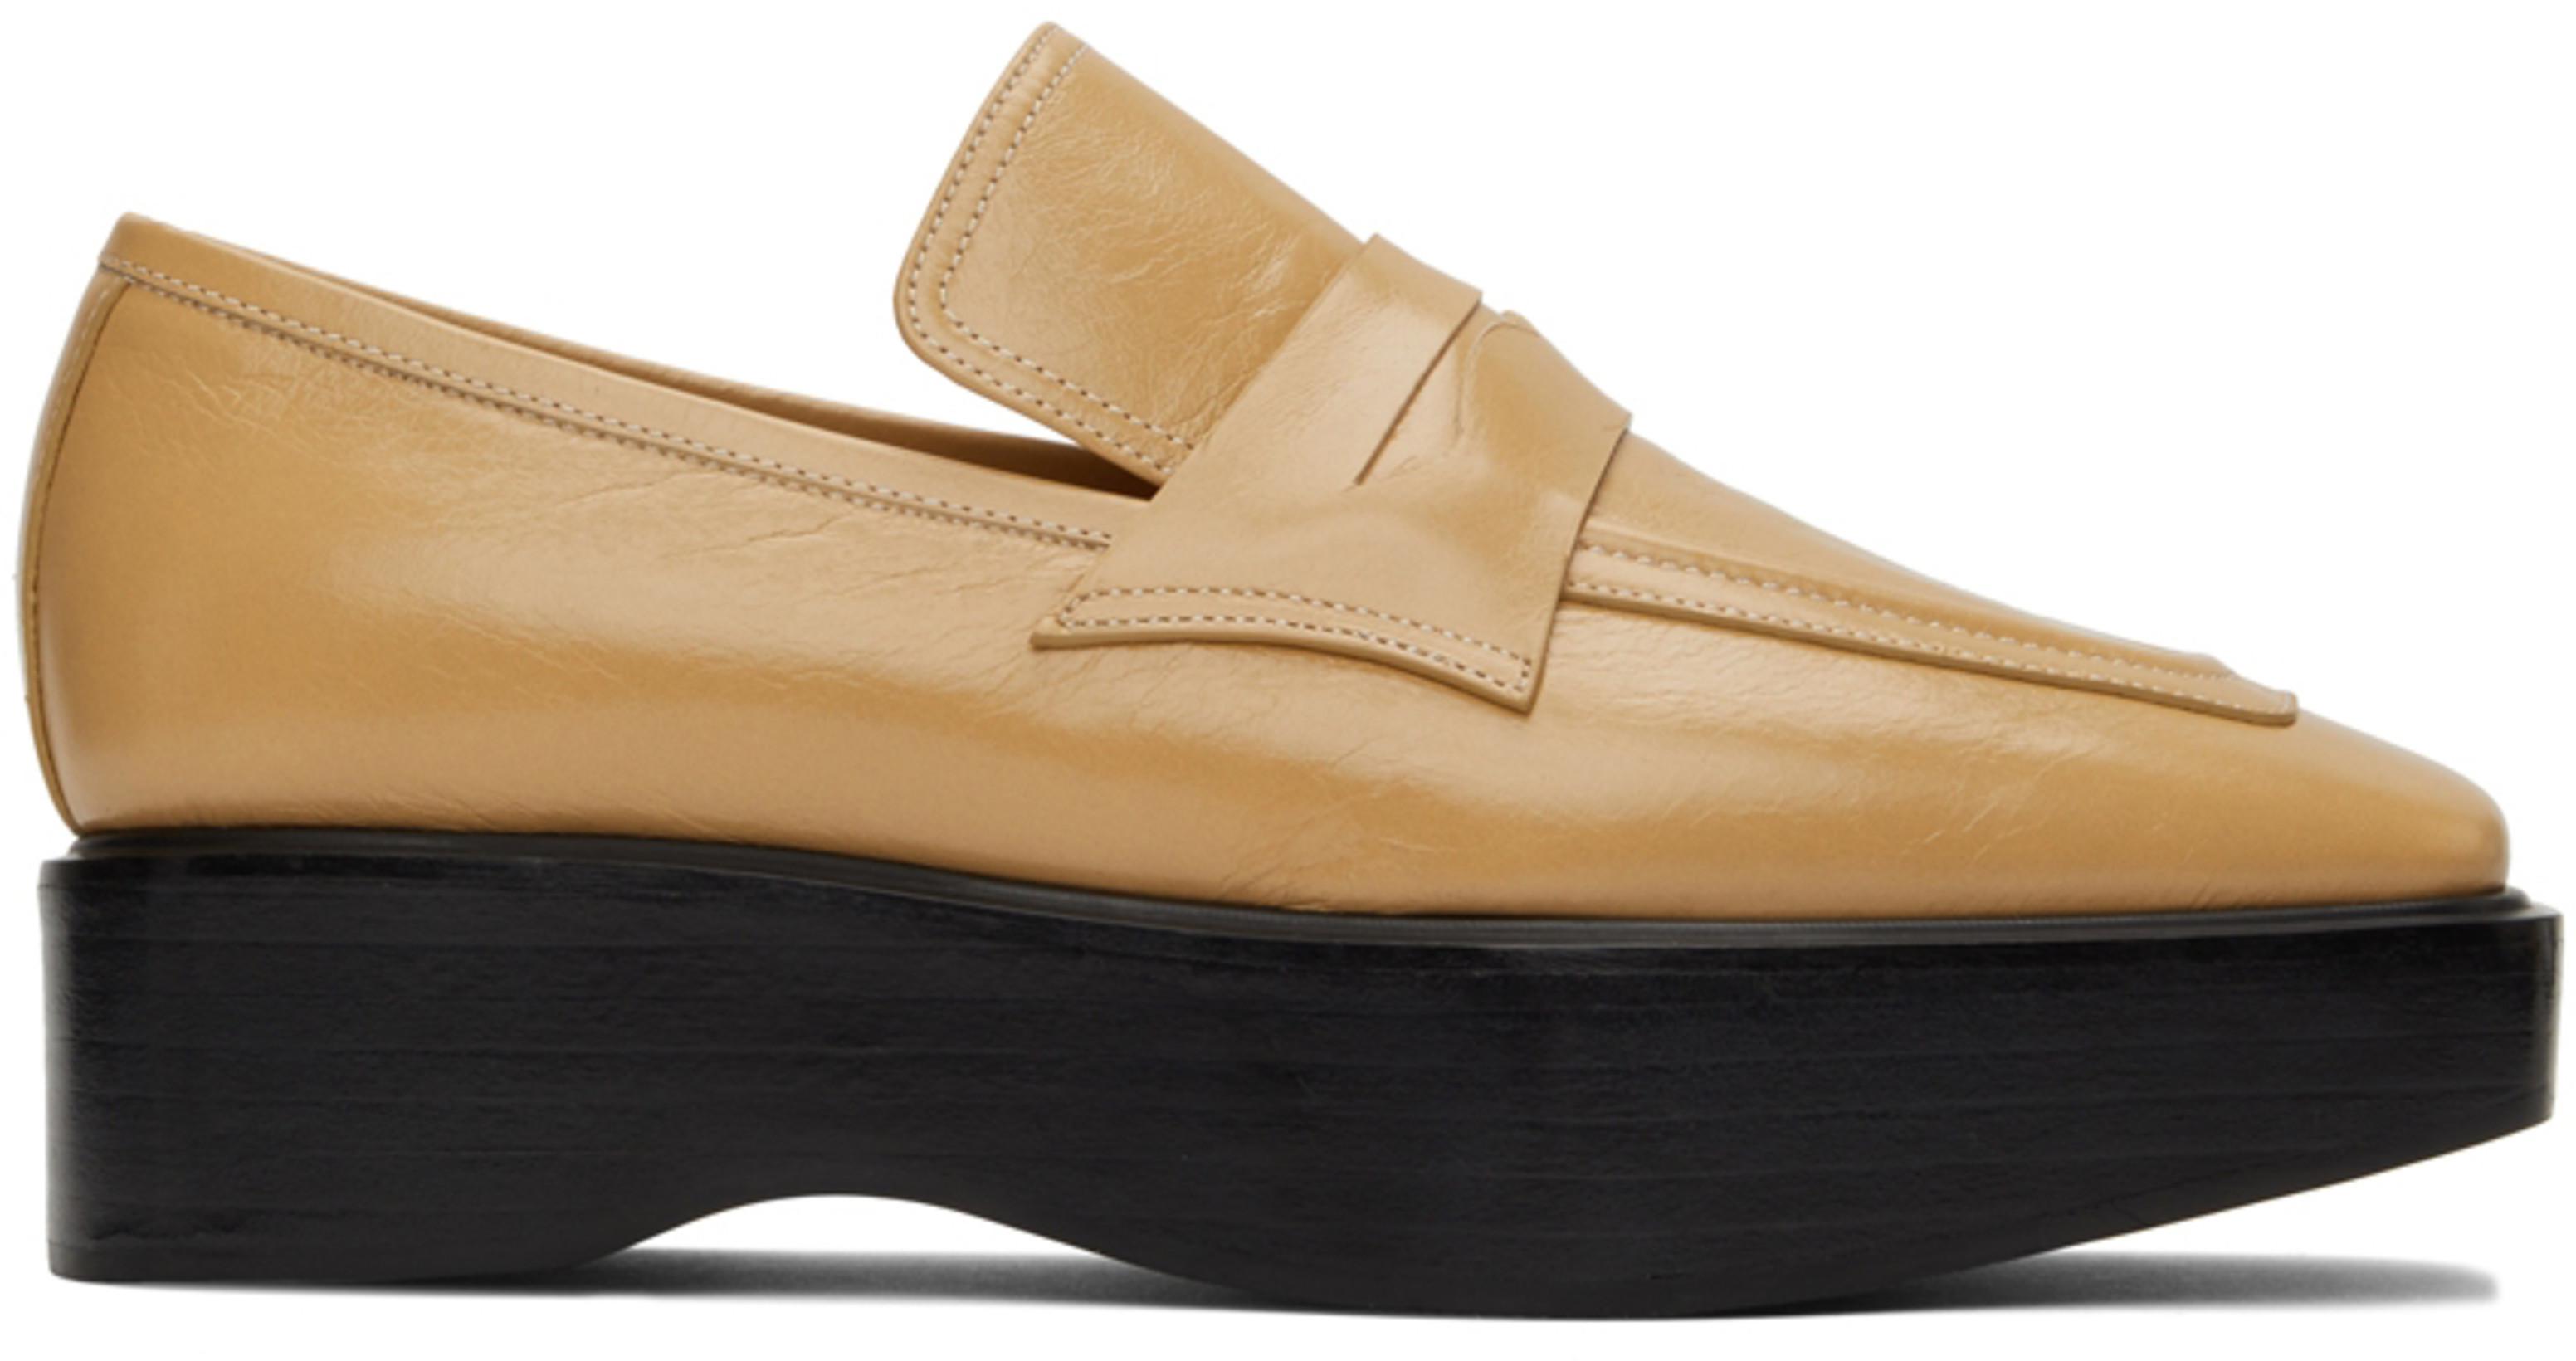 SSENSE Exclusive Beige Platform Loafers by COMME SE-A